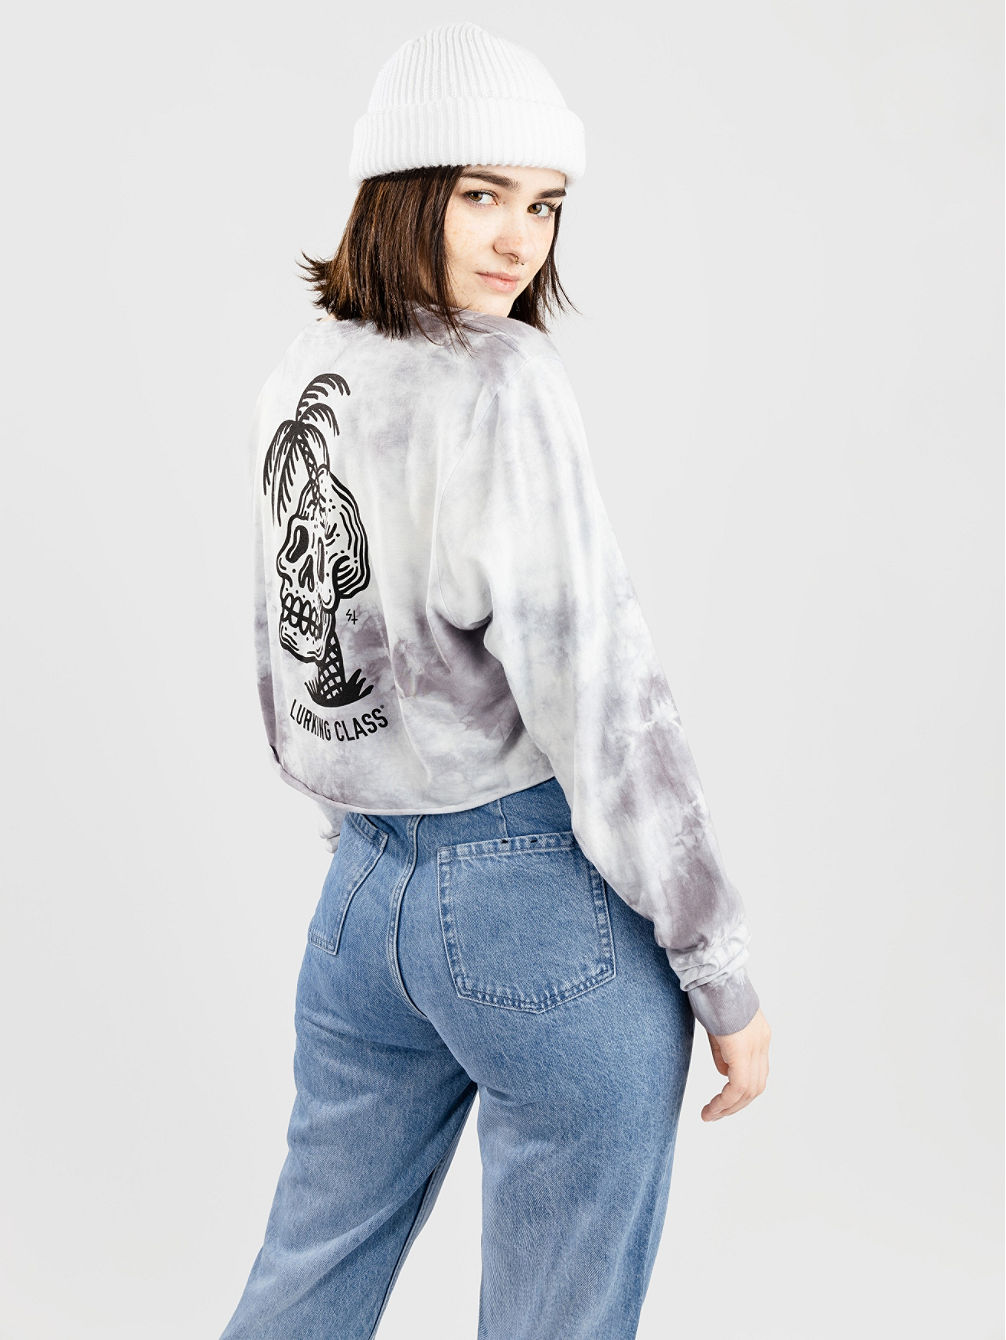 Palm Skull Cropped T-Shirt